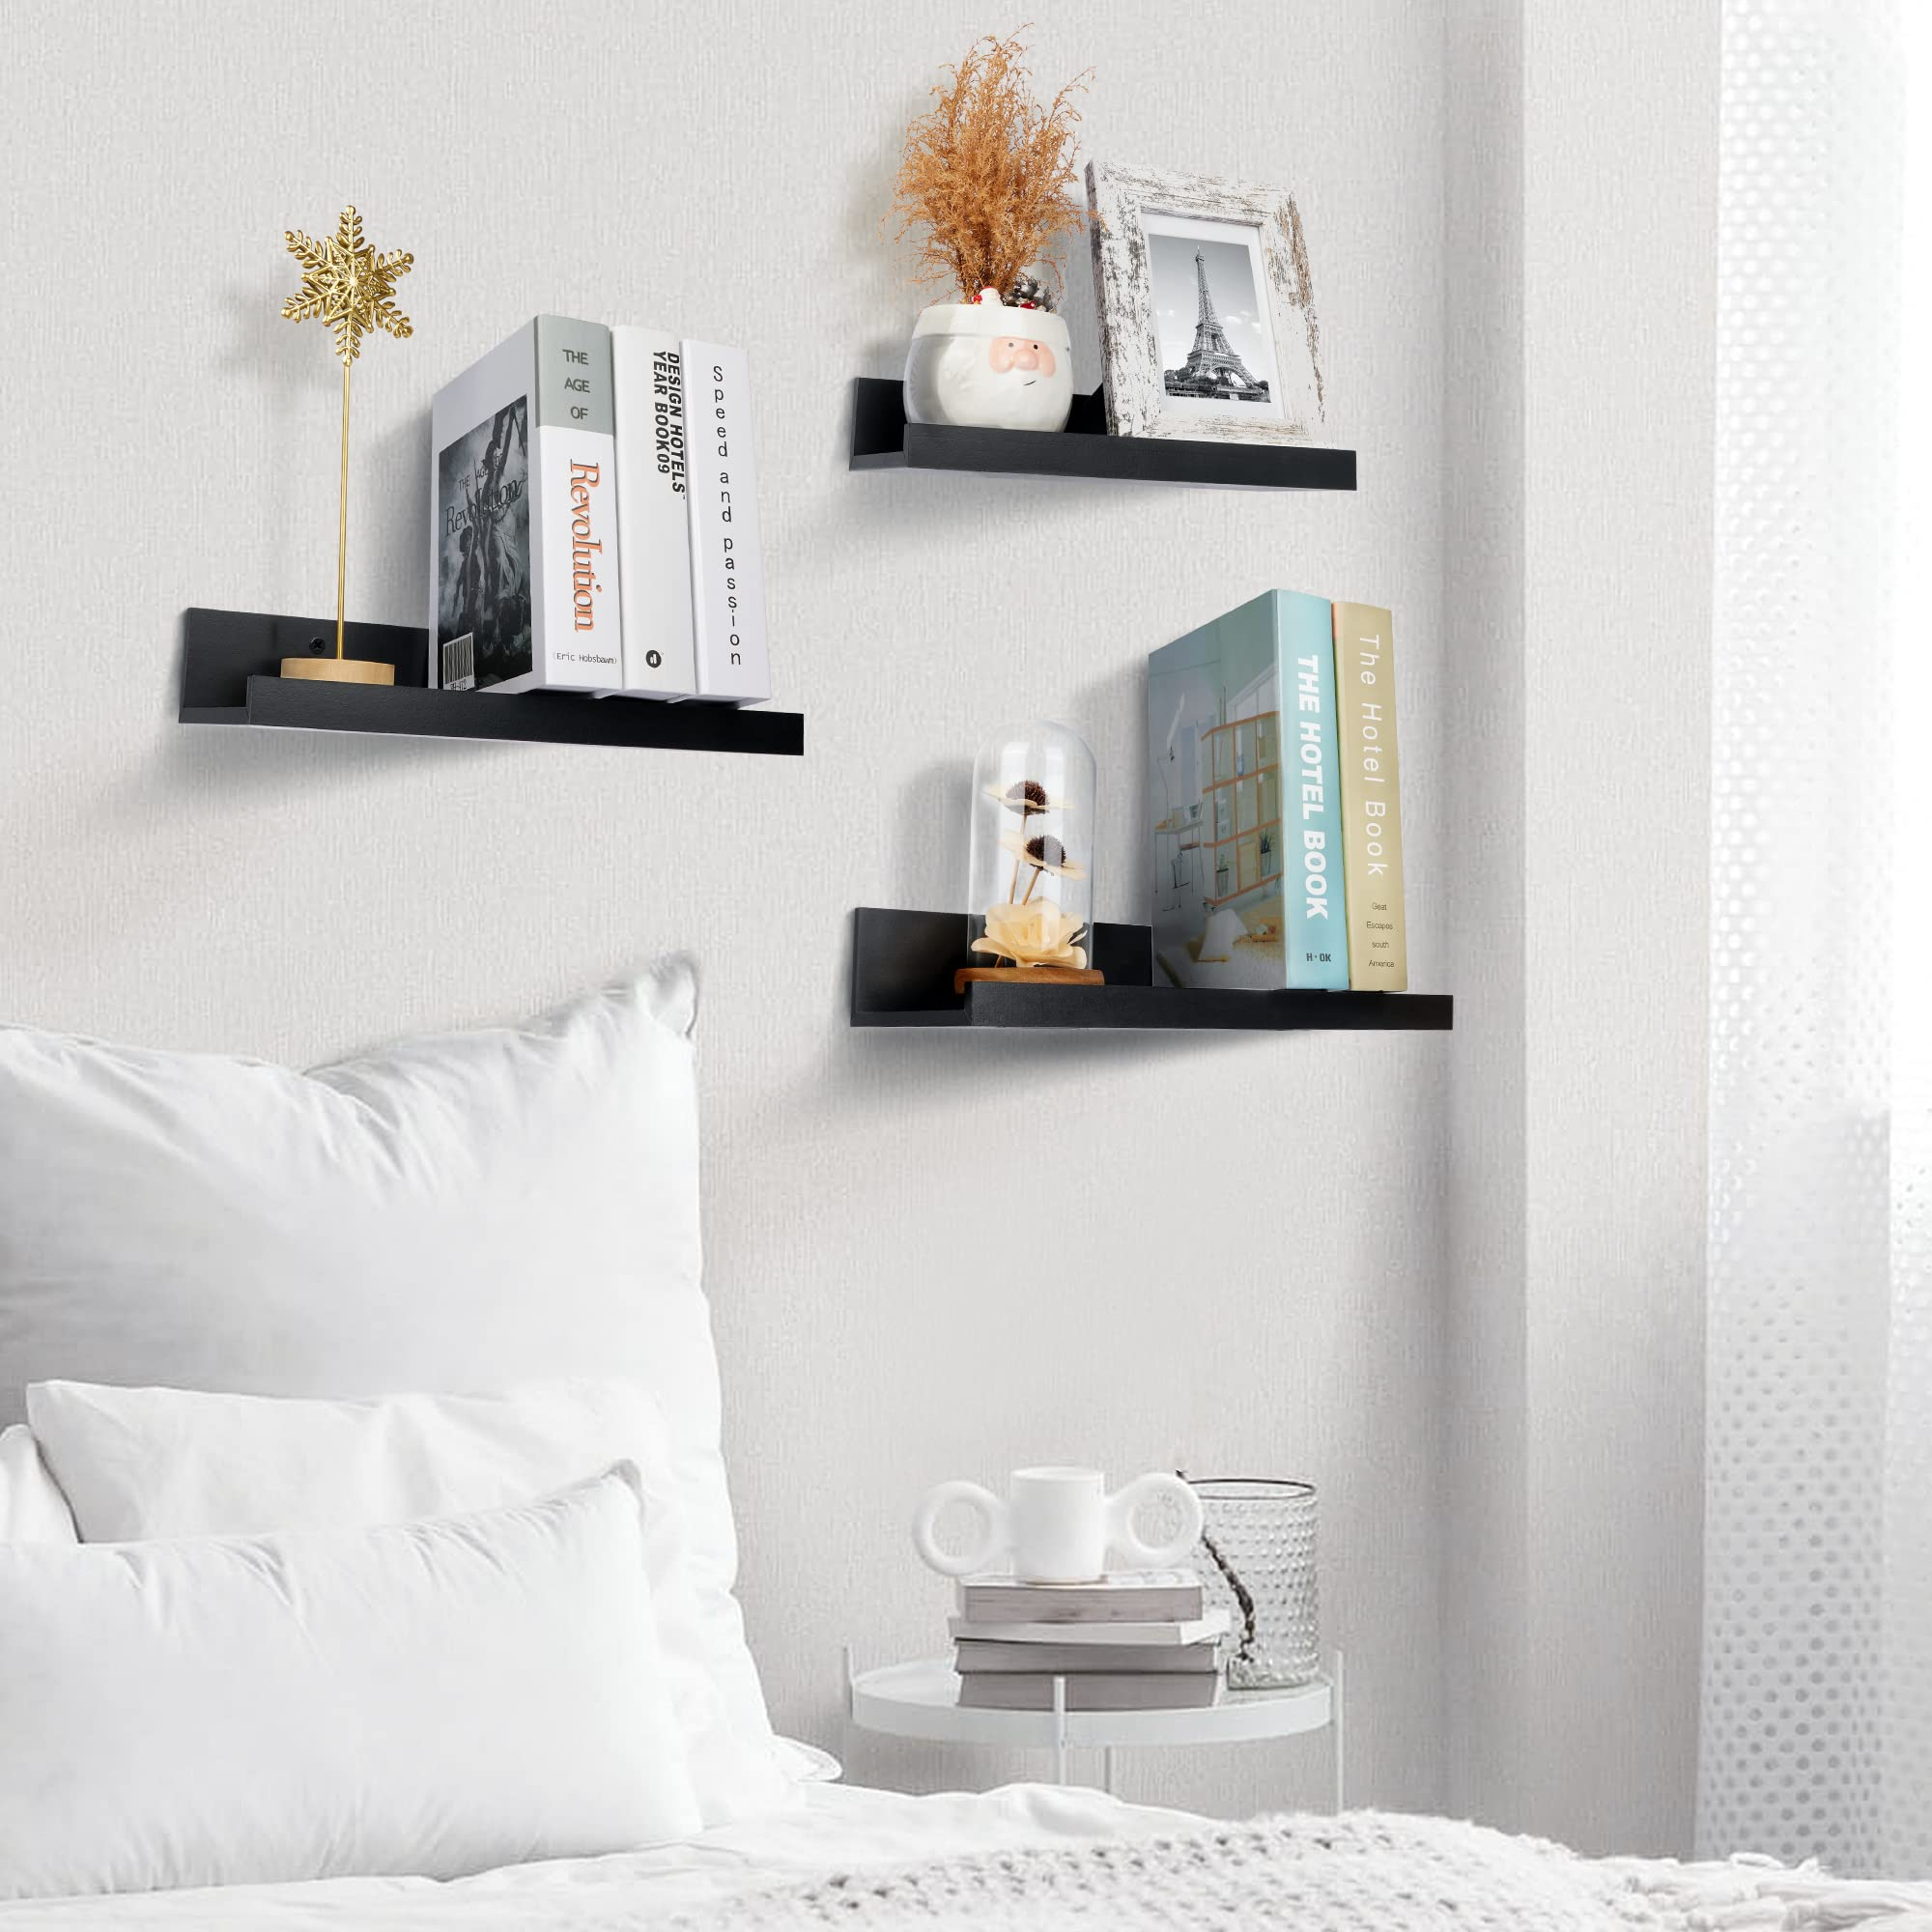 Design Ideas for Wall-Mounted Floating Shelves